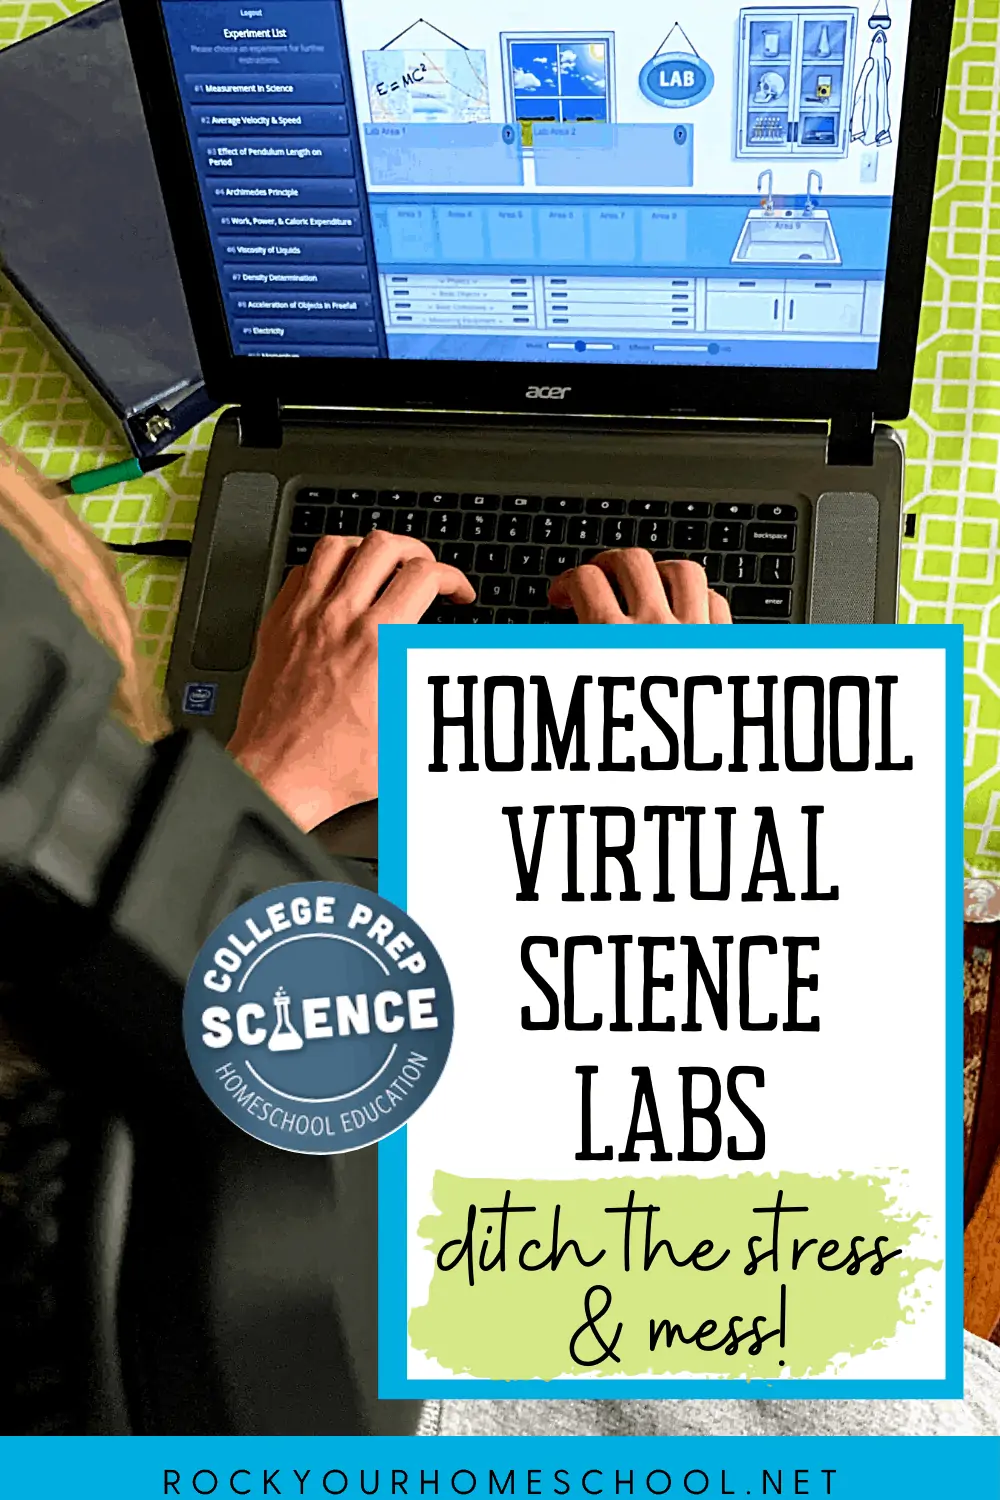 Amazing Way to Take the Stress & Mess Out of Homeschool Science Labs